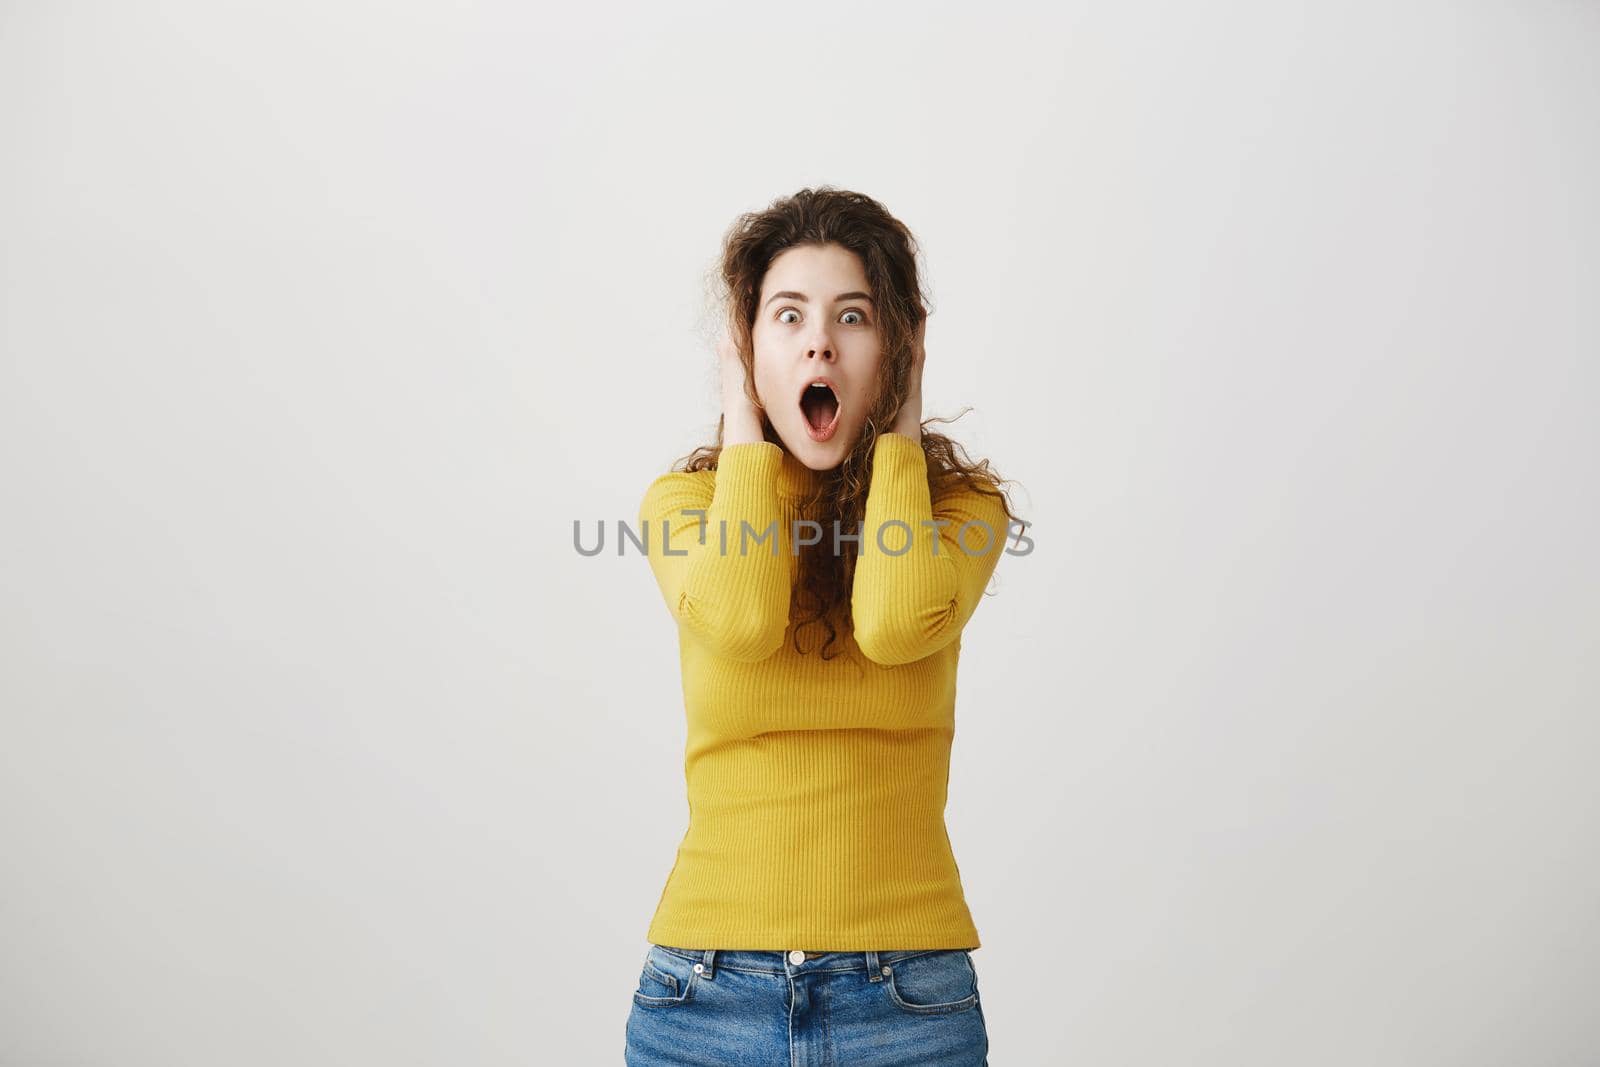 Portrait excited screaming young woman standing isolated over white background. Looking camera